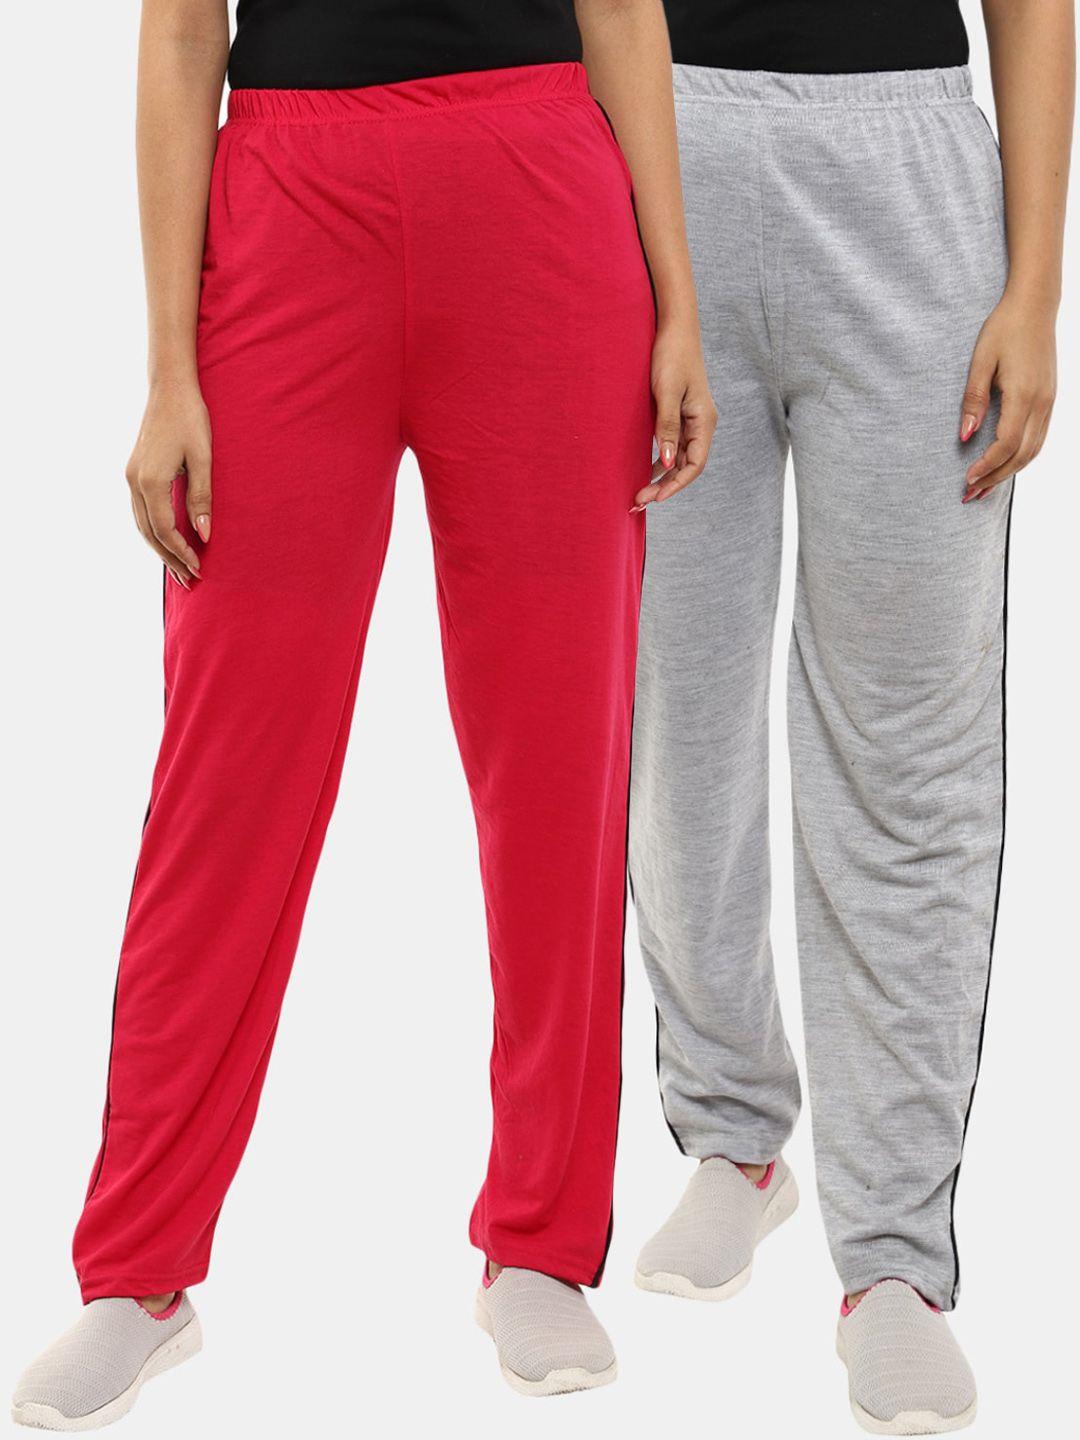 v-mart women pack of 2 fuchsia pink & grey solid track pants